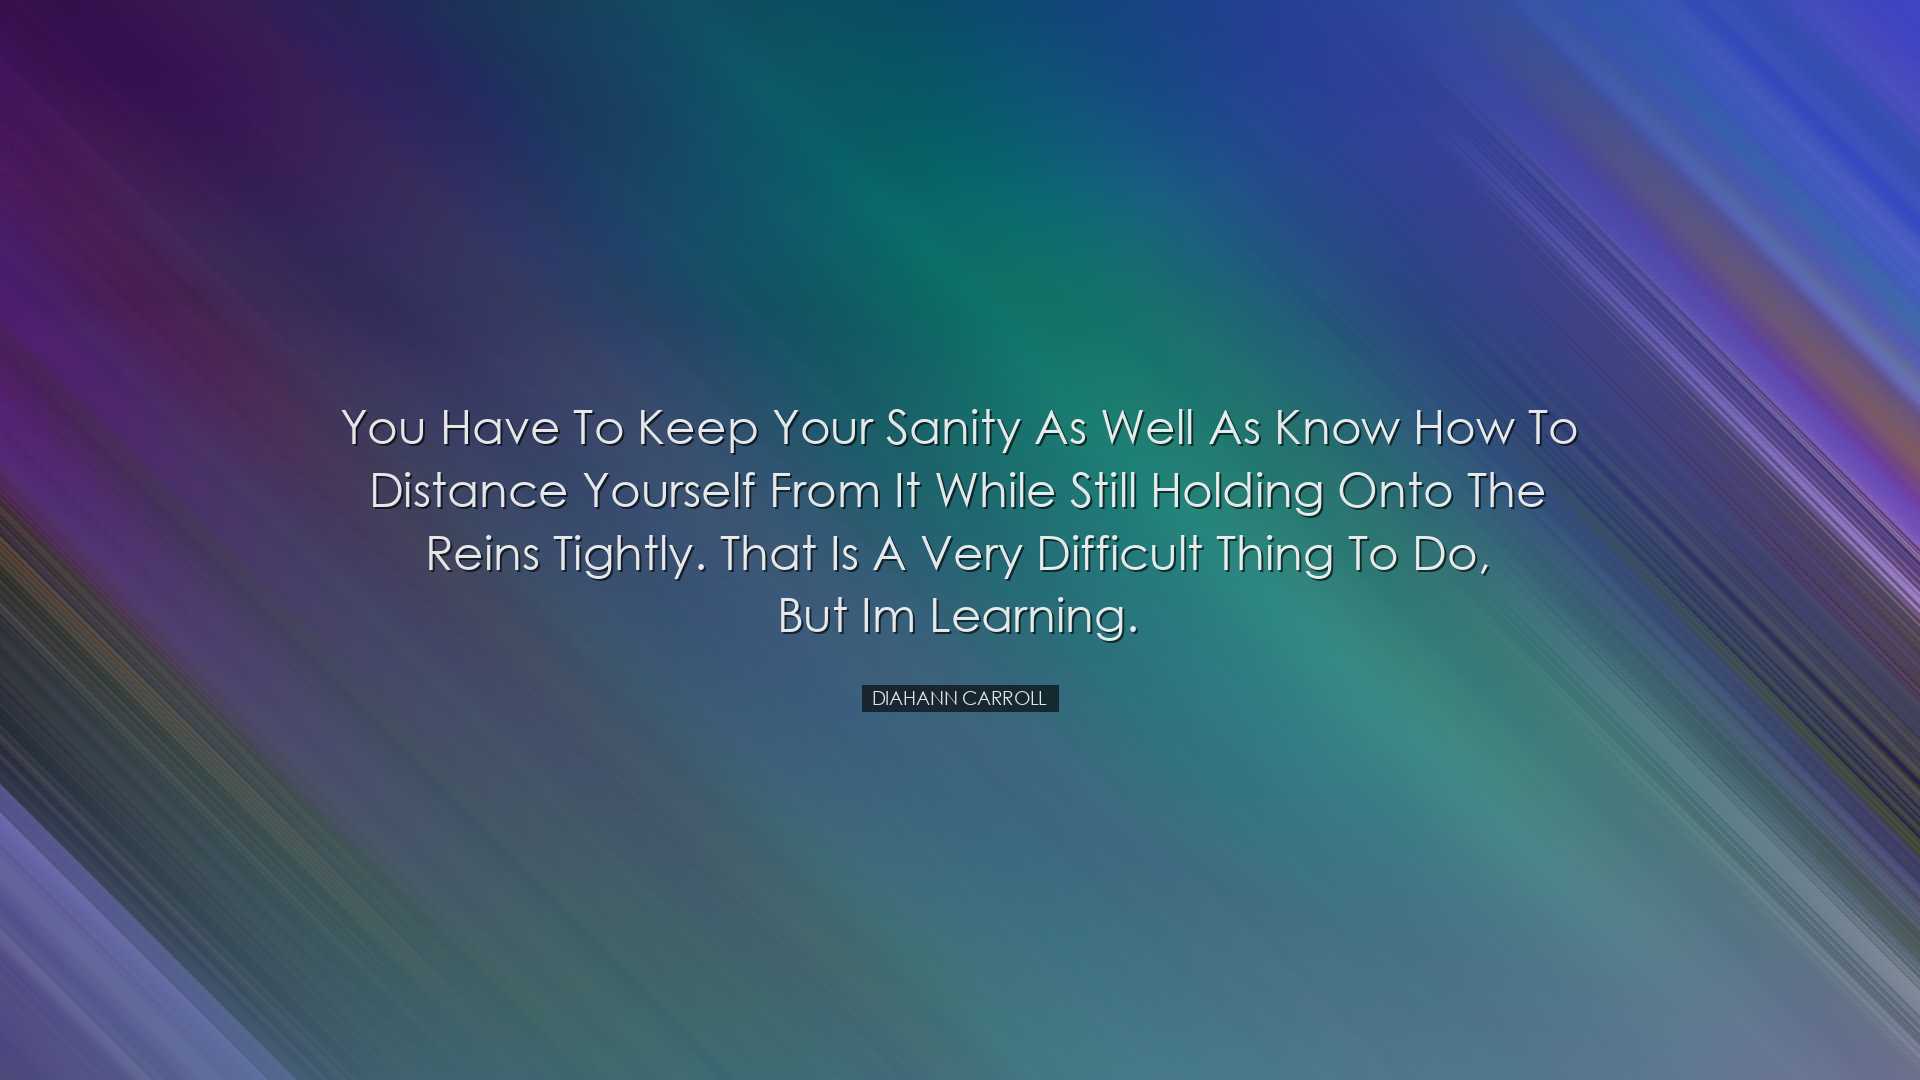 You have to keep your sanity as well as know how to distance yours